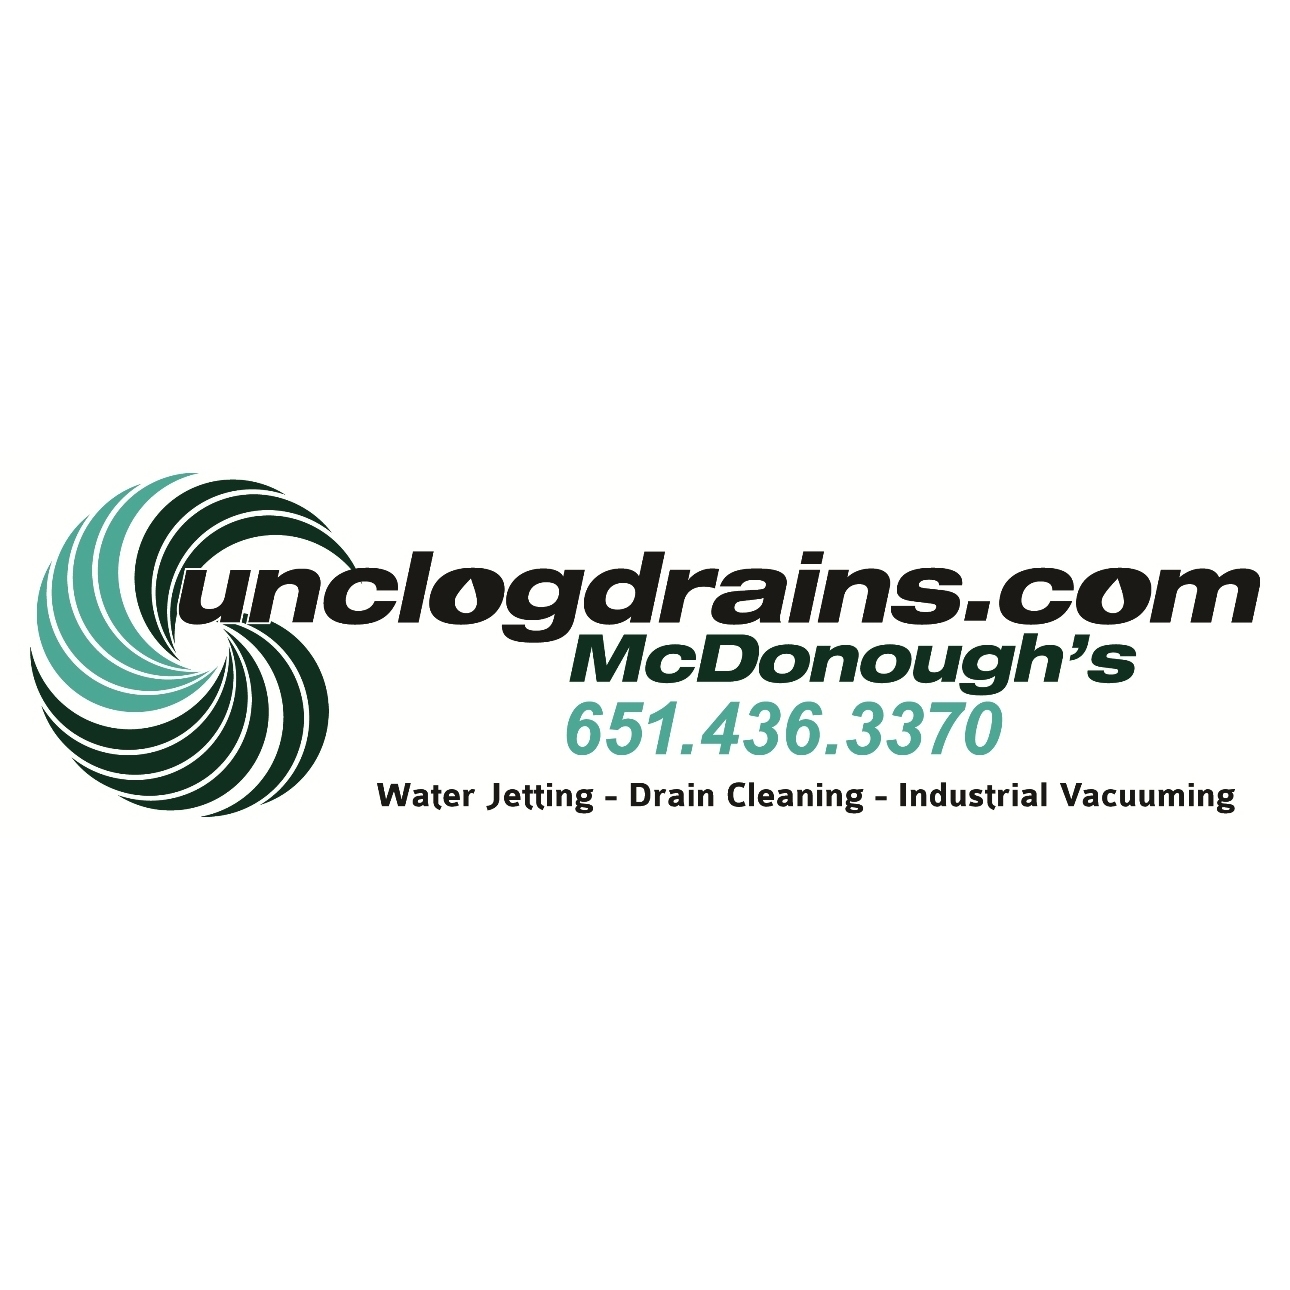 McDonough’s - St Paul MN Sewer, Water Jetting, and Drain Cleaning Photo